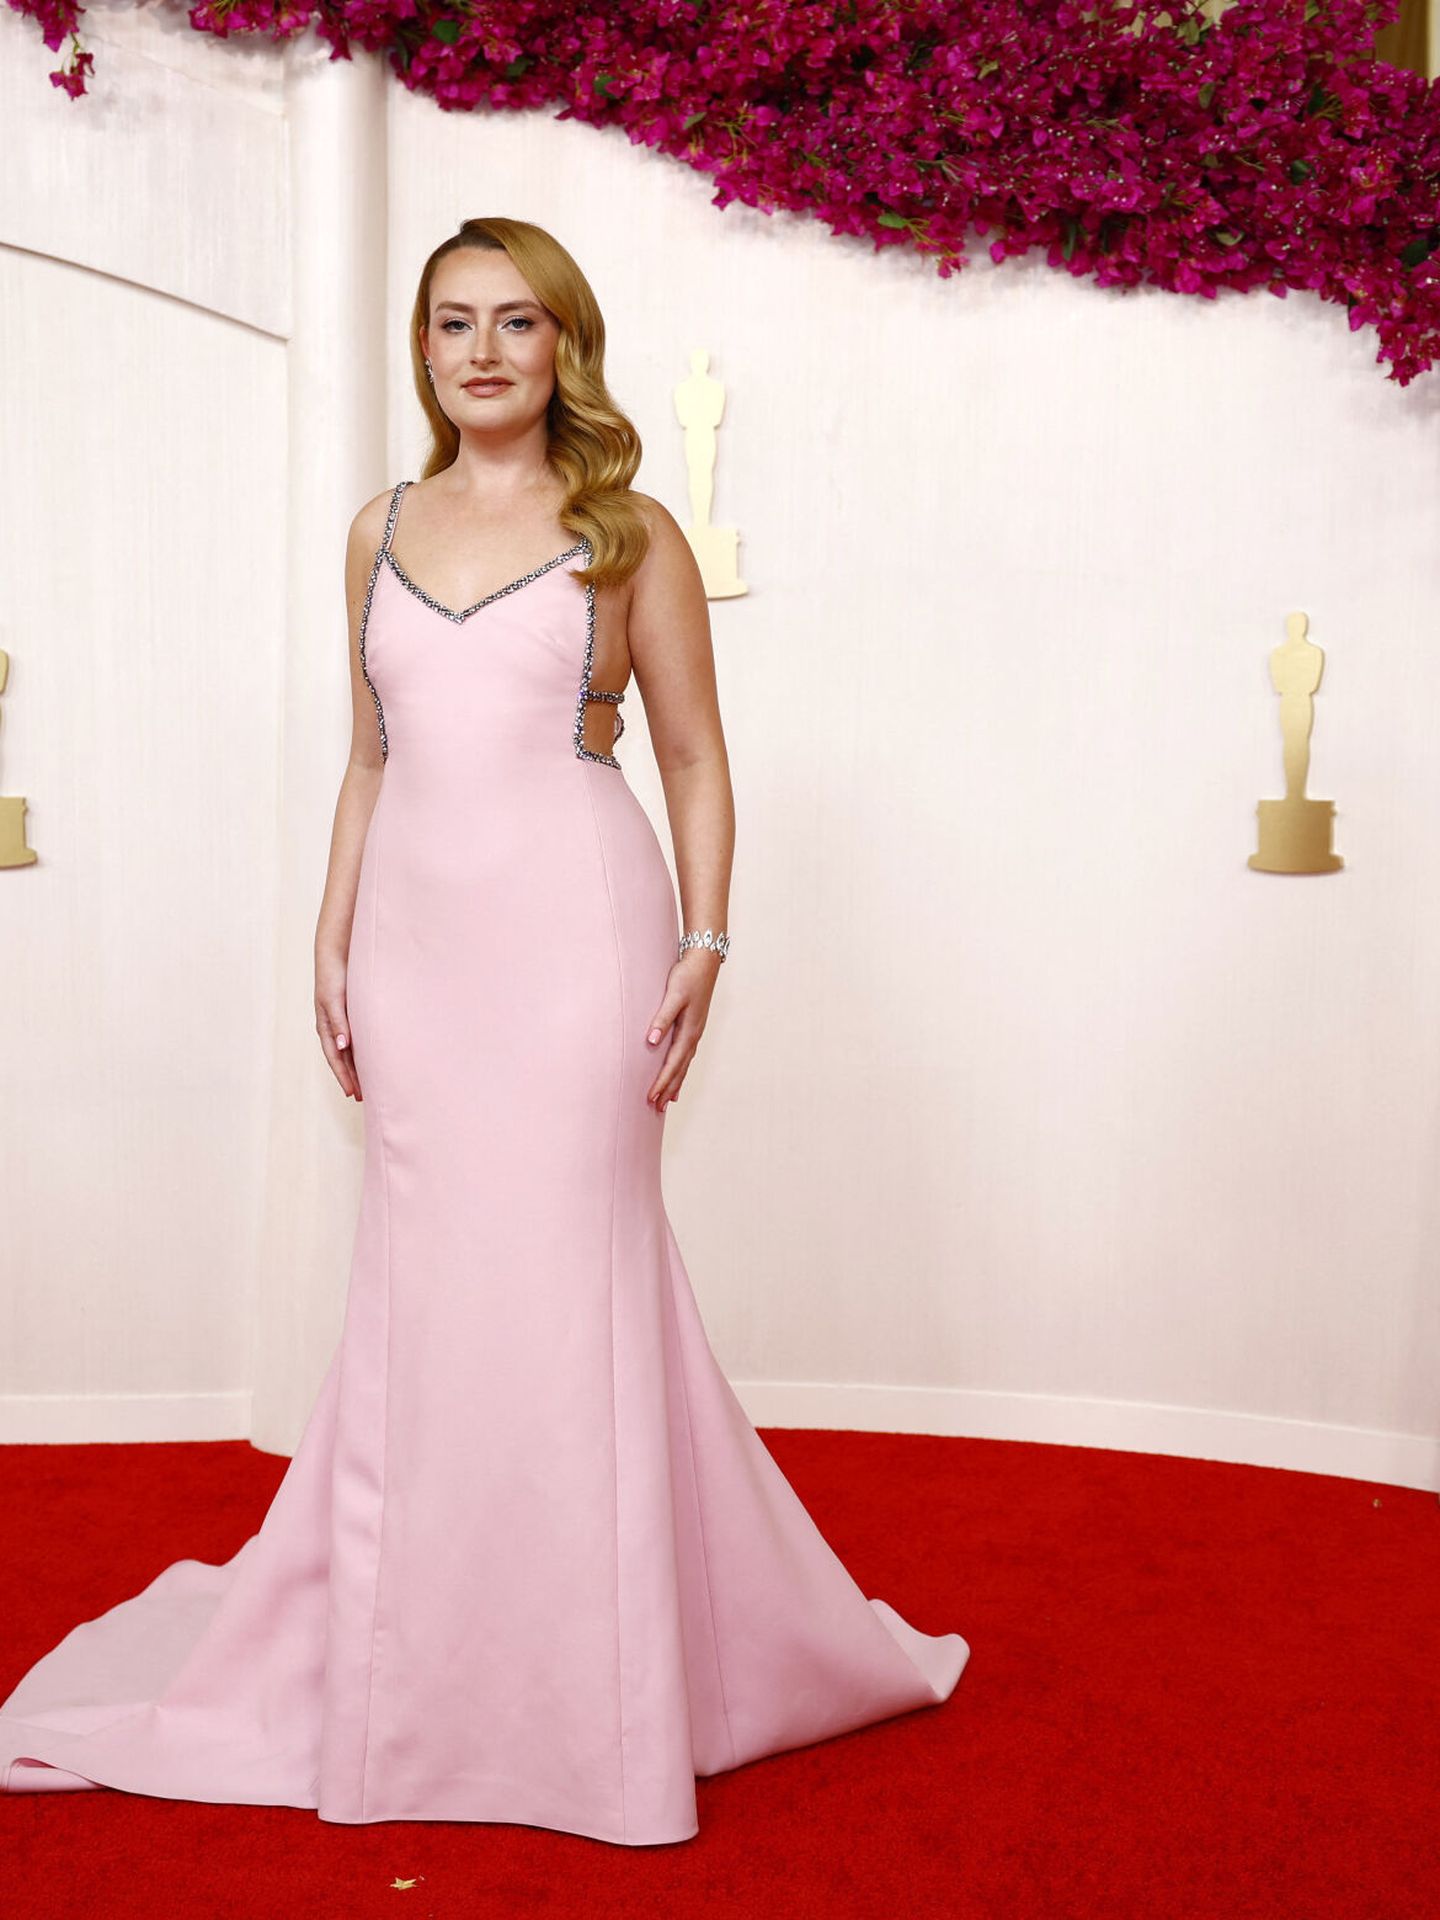 Amelia Dimoldenberg poses on the red carpet during the Oscars arrivals at the 96th Academy Awards in Hollywood, Los Angeles, California, U.S., March 10, 2024.